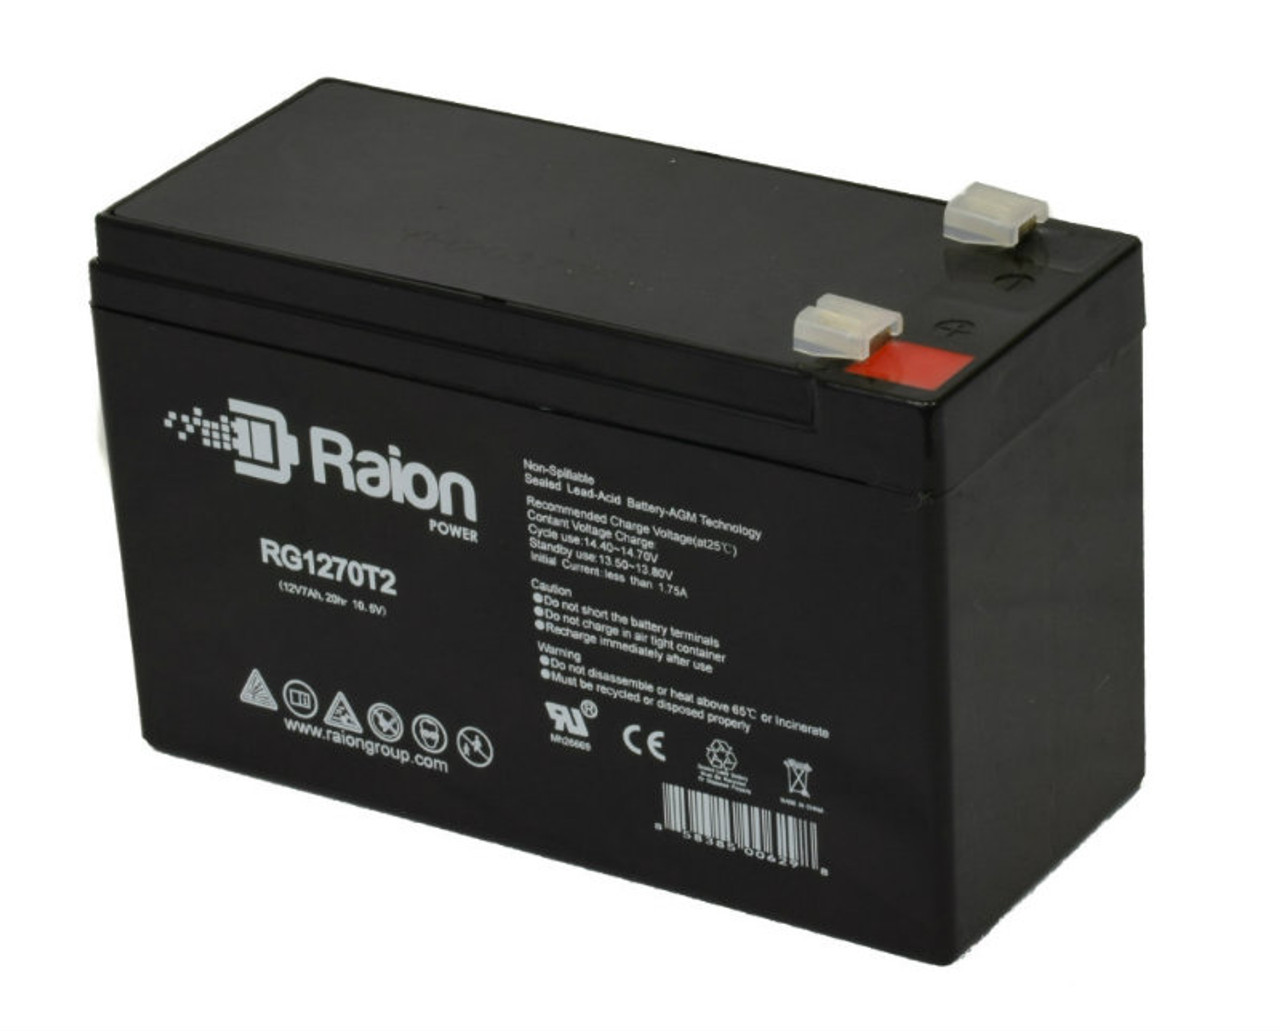 Raion Power RG1270T2 12V 7Ah Rechargeable Battery for BPOWER BPL 7.2-12